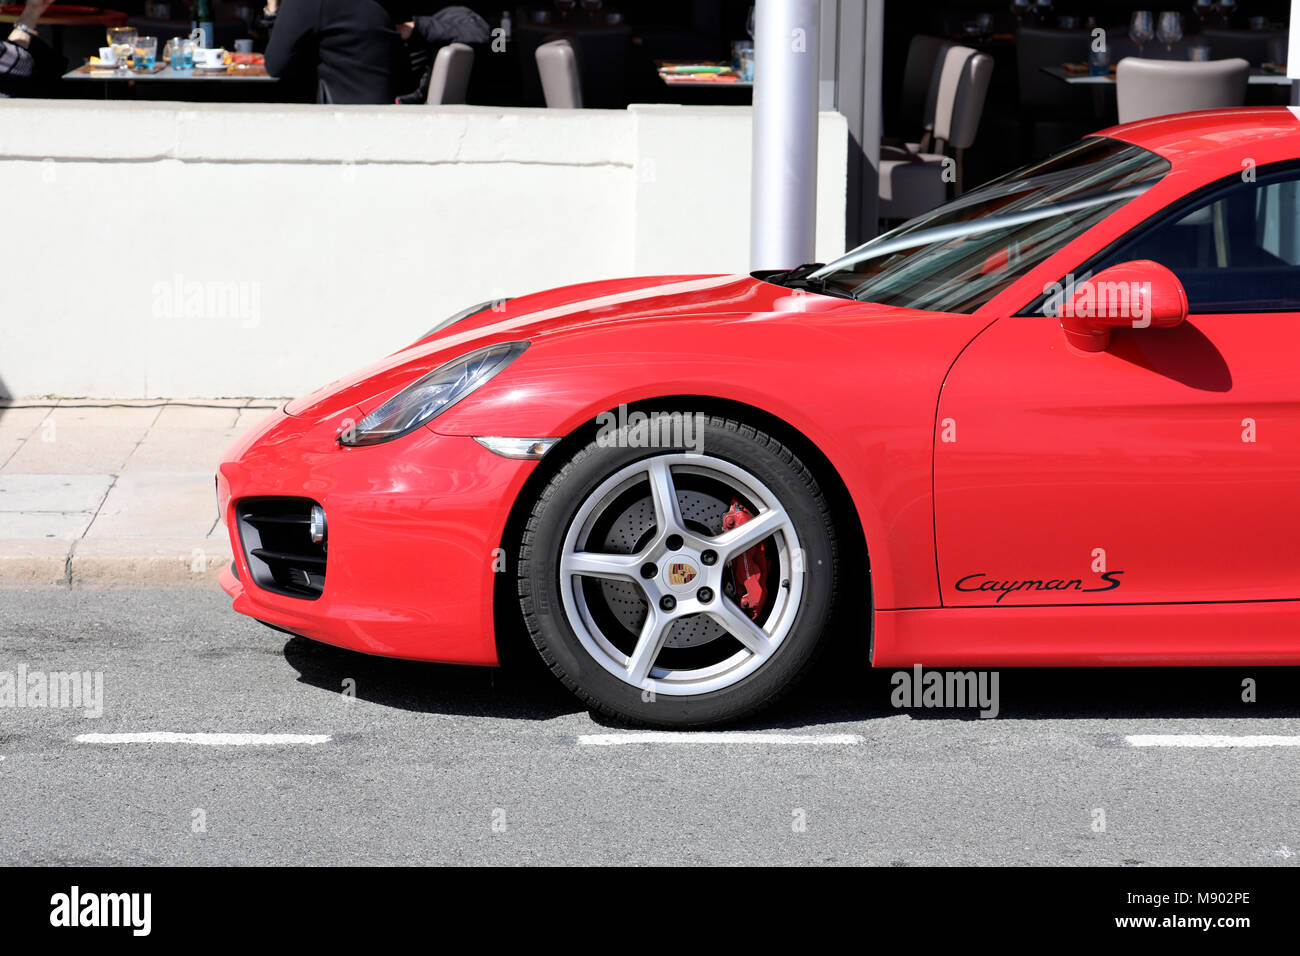 Menton, France - March 19, 2018: Luxury Red Porsche 718 Cayman S (Side View) Parked In The Street Of Menton On The French Riviera Stock Photo